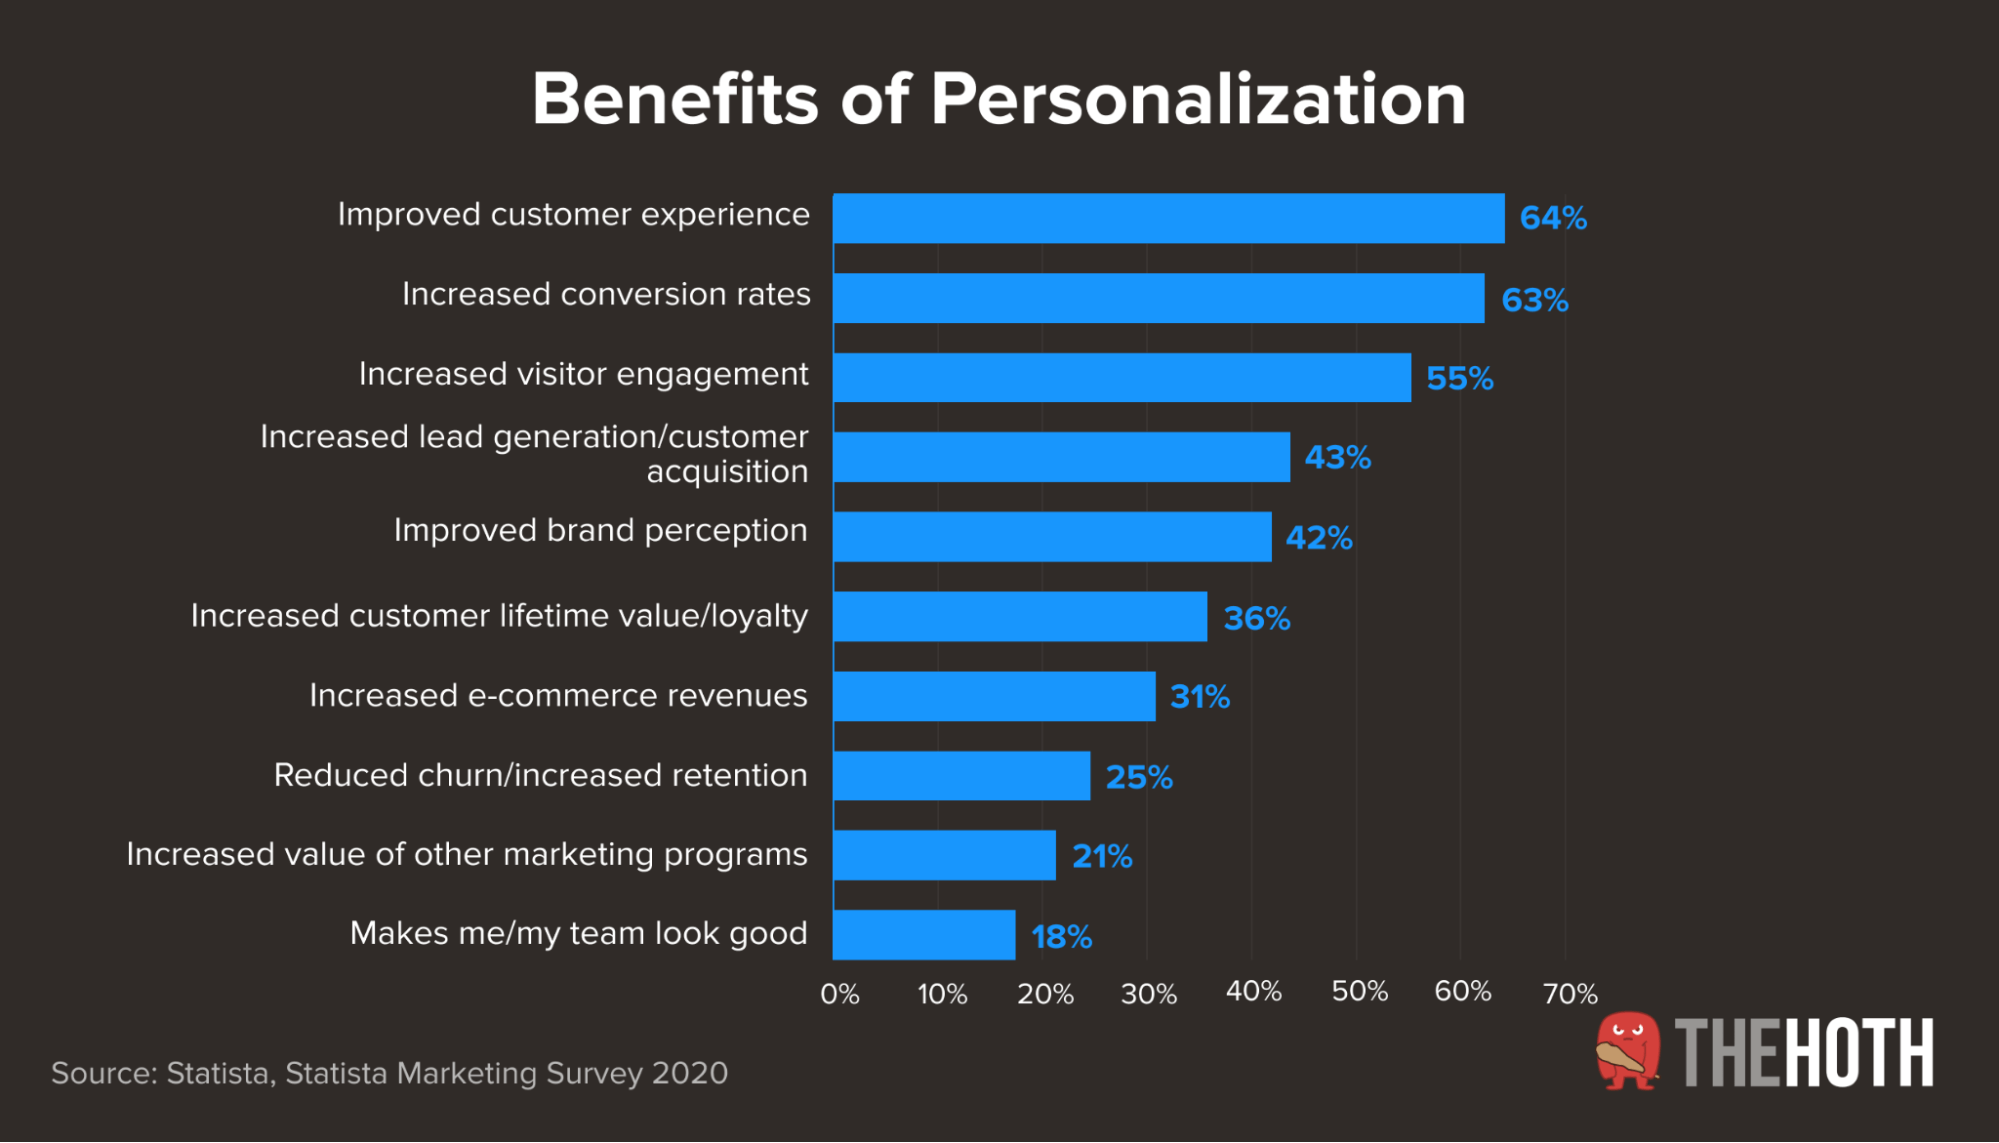 Top benefits from personalization according to marketing professionals